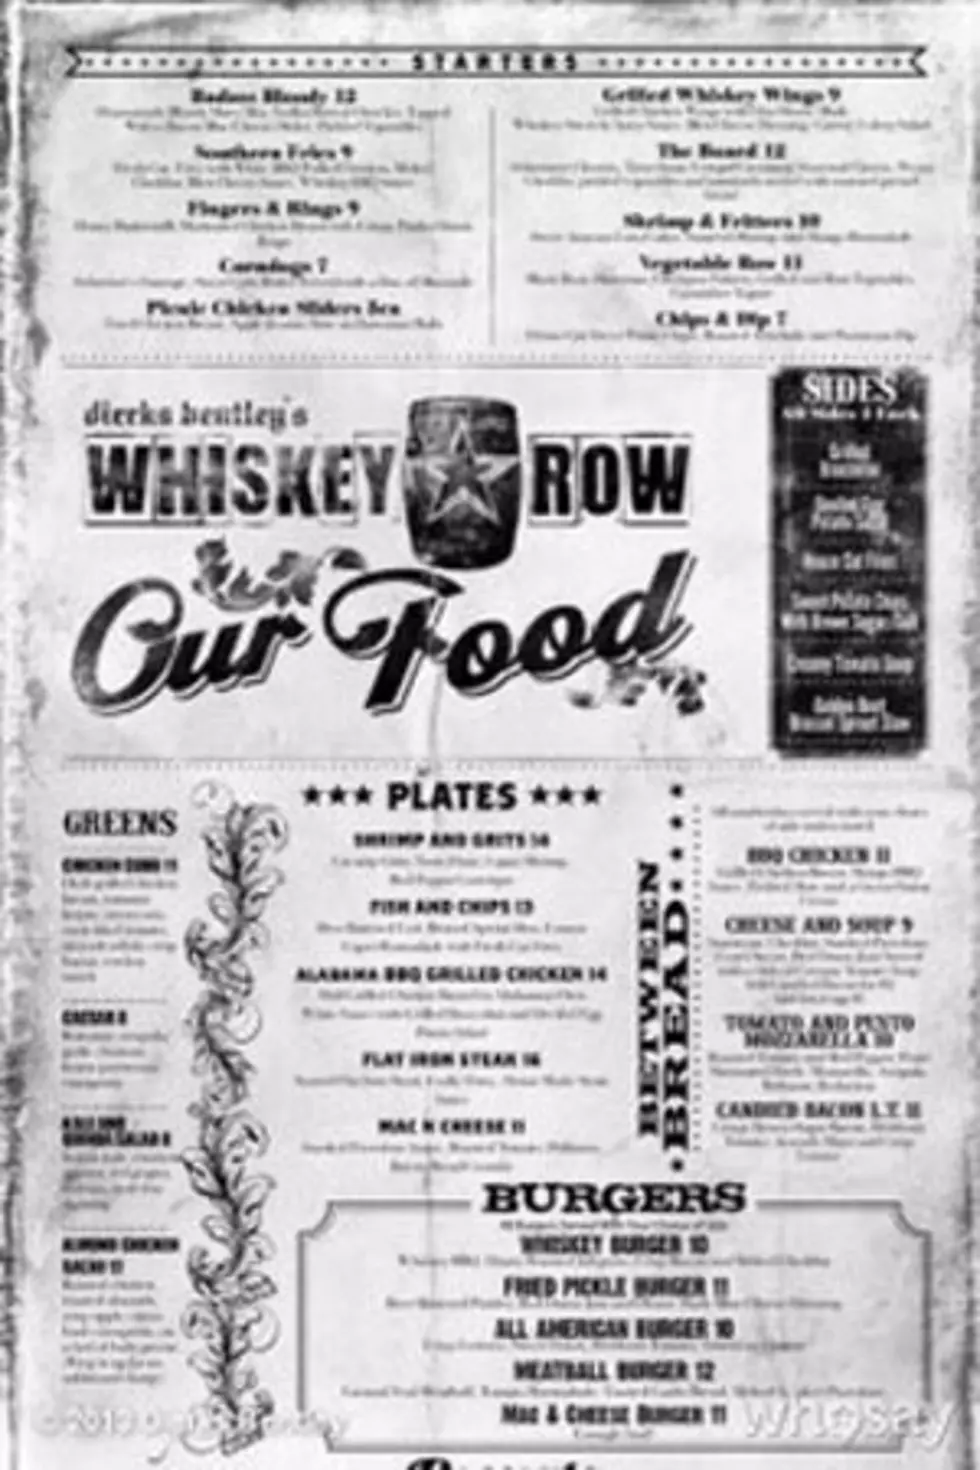 Dierks Bentley Shares Menu From His Brand New Scottsdale Bar, Whiskey Row